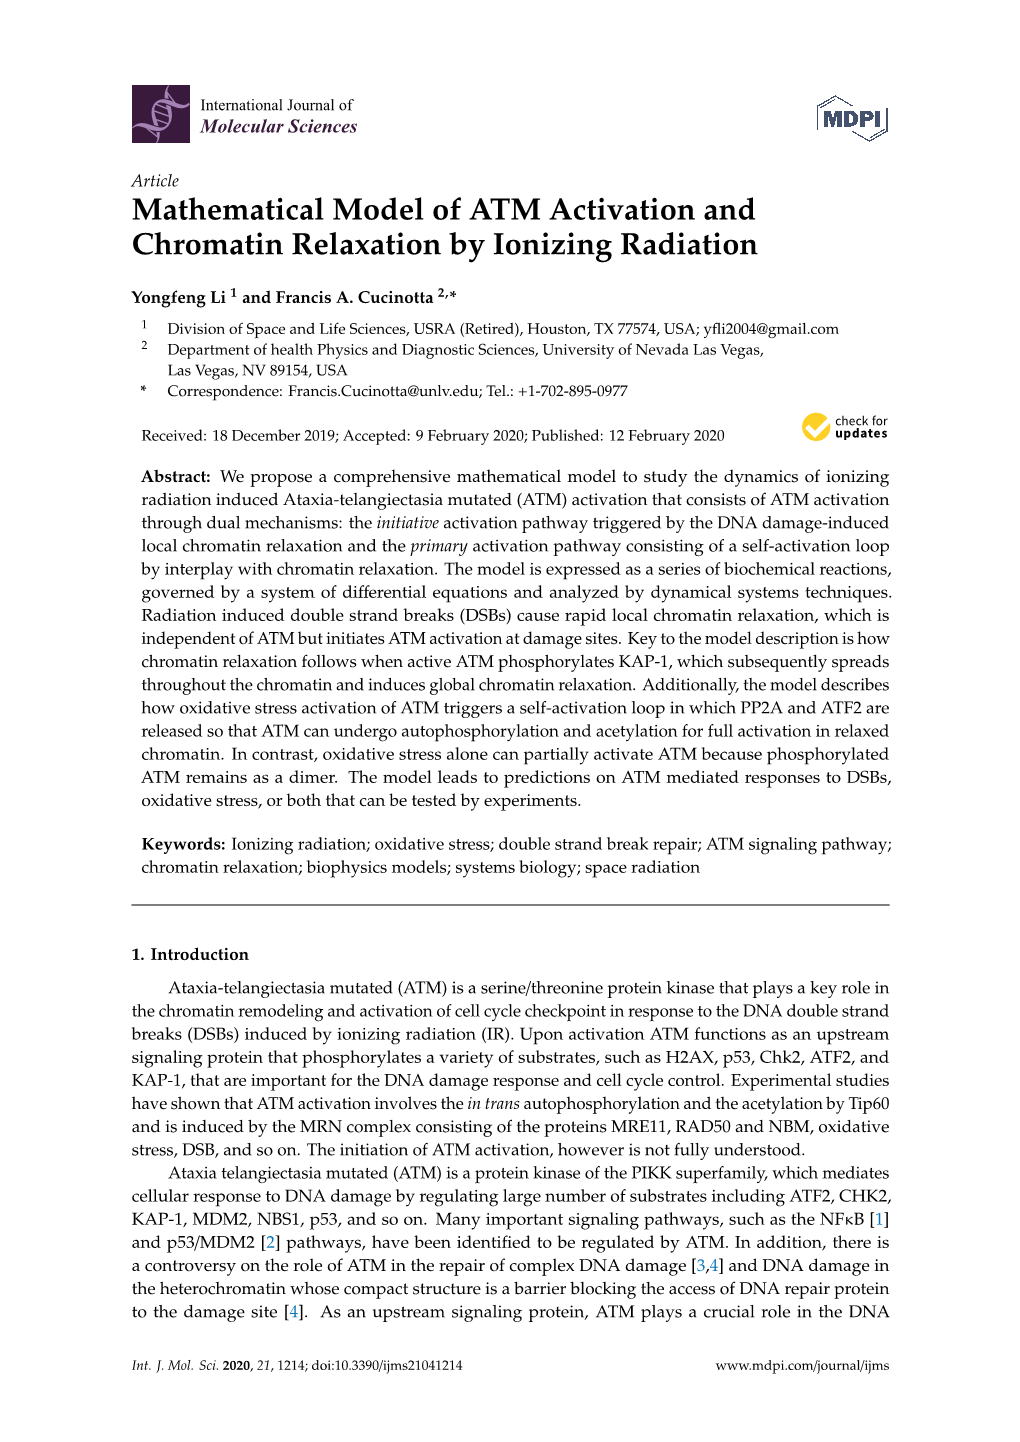 Mathematical Model of ATM Activation and Chromatin Relaxation by Ionizing Radiation